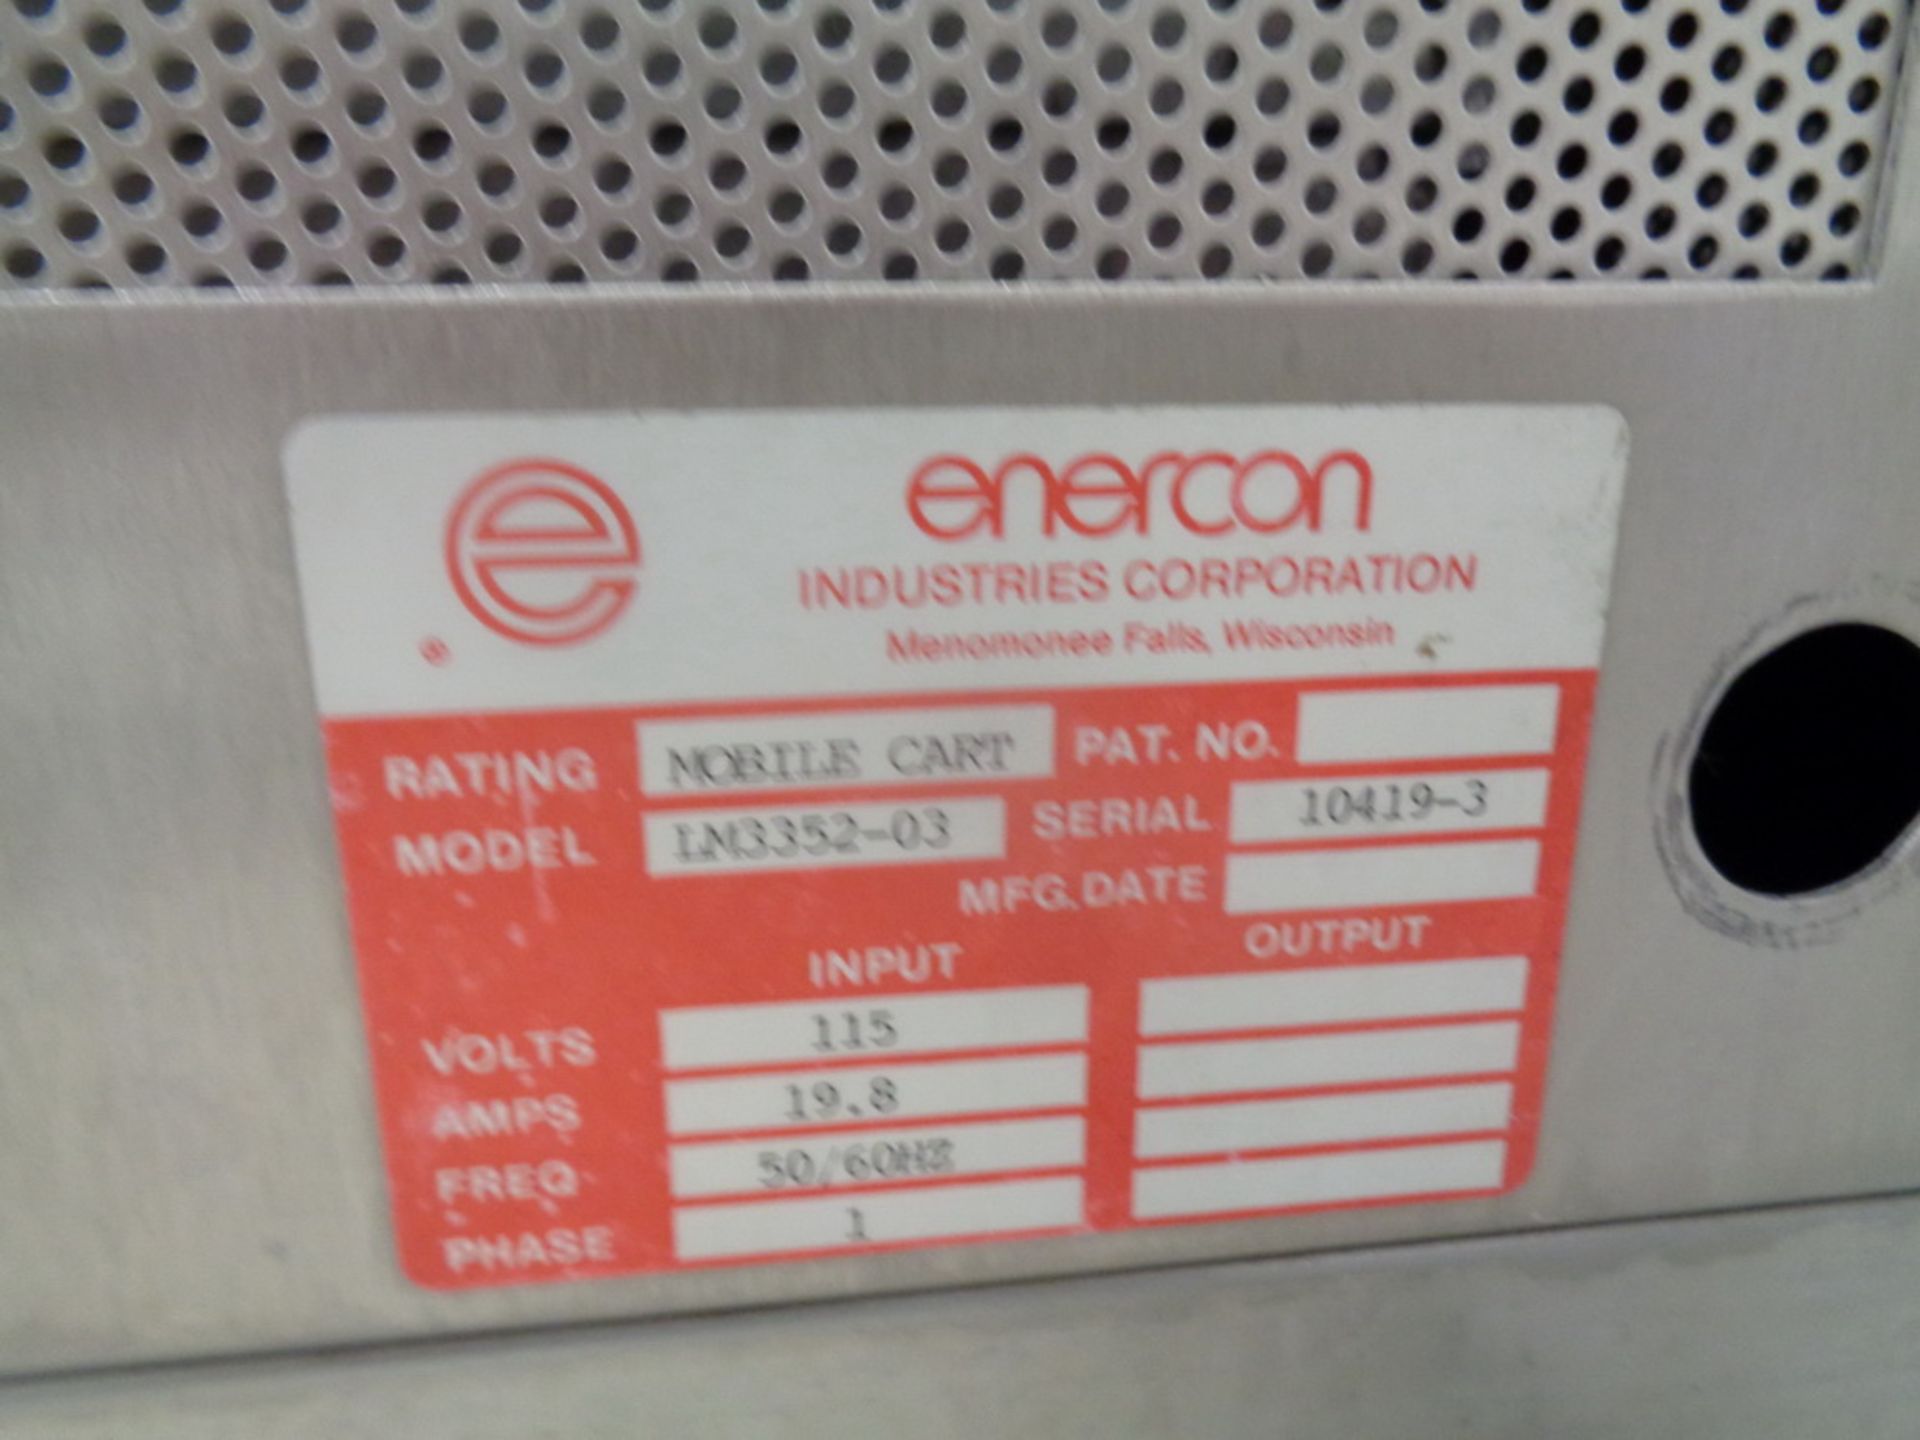 ENERCON INDUCTION CAP SEALER, MODEL LM3284-04, SERIAL NUMBER 10419-1, SEE AUCTIONEER NOTE - Image 9 of 9